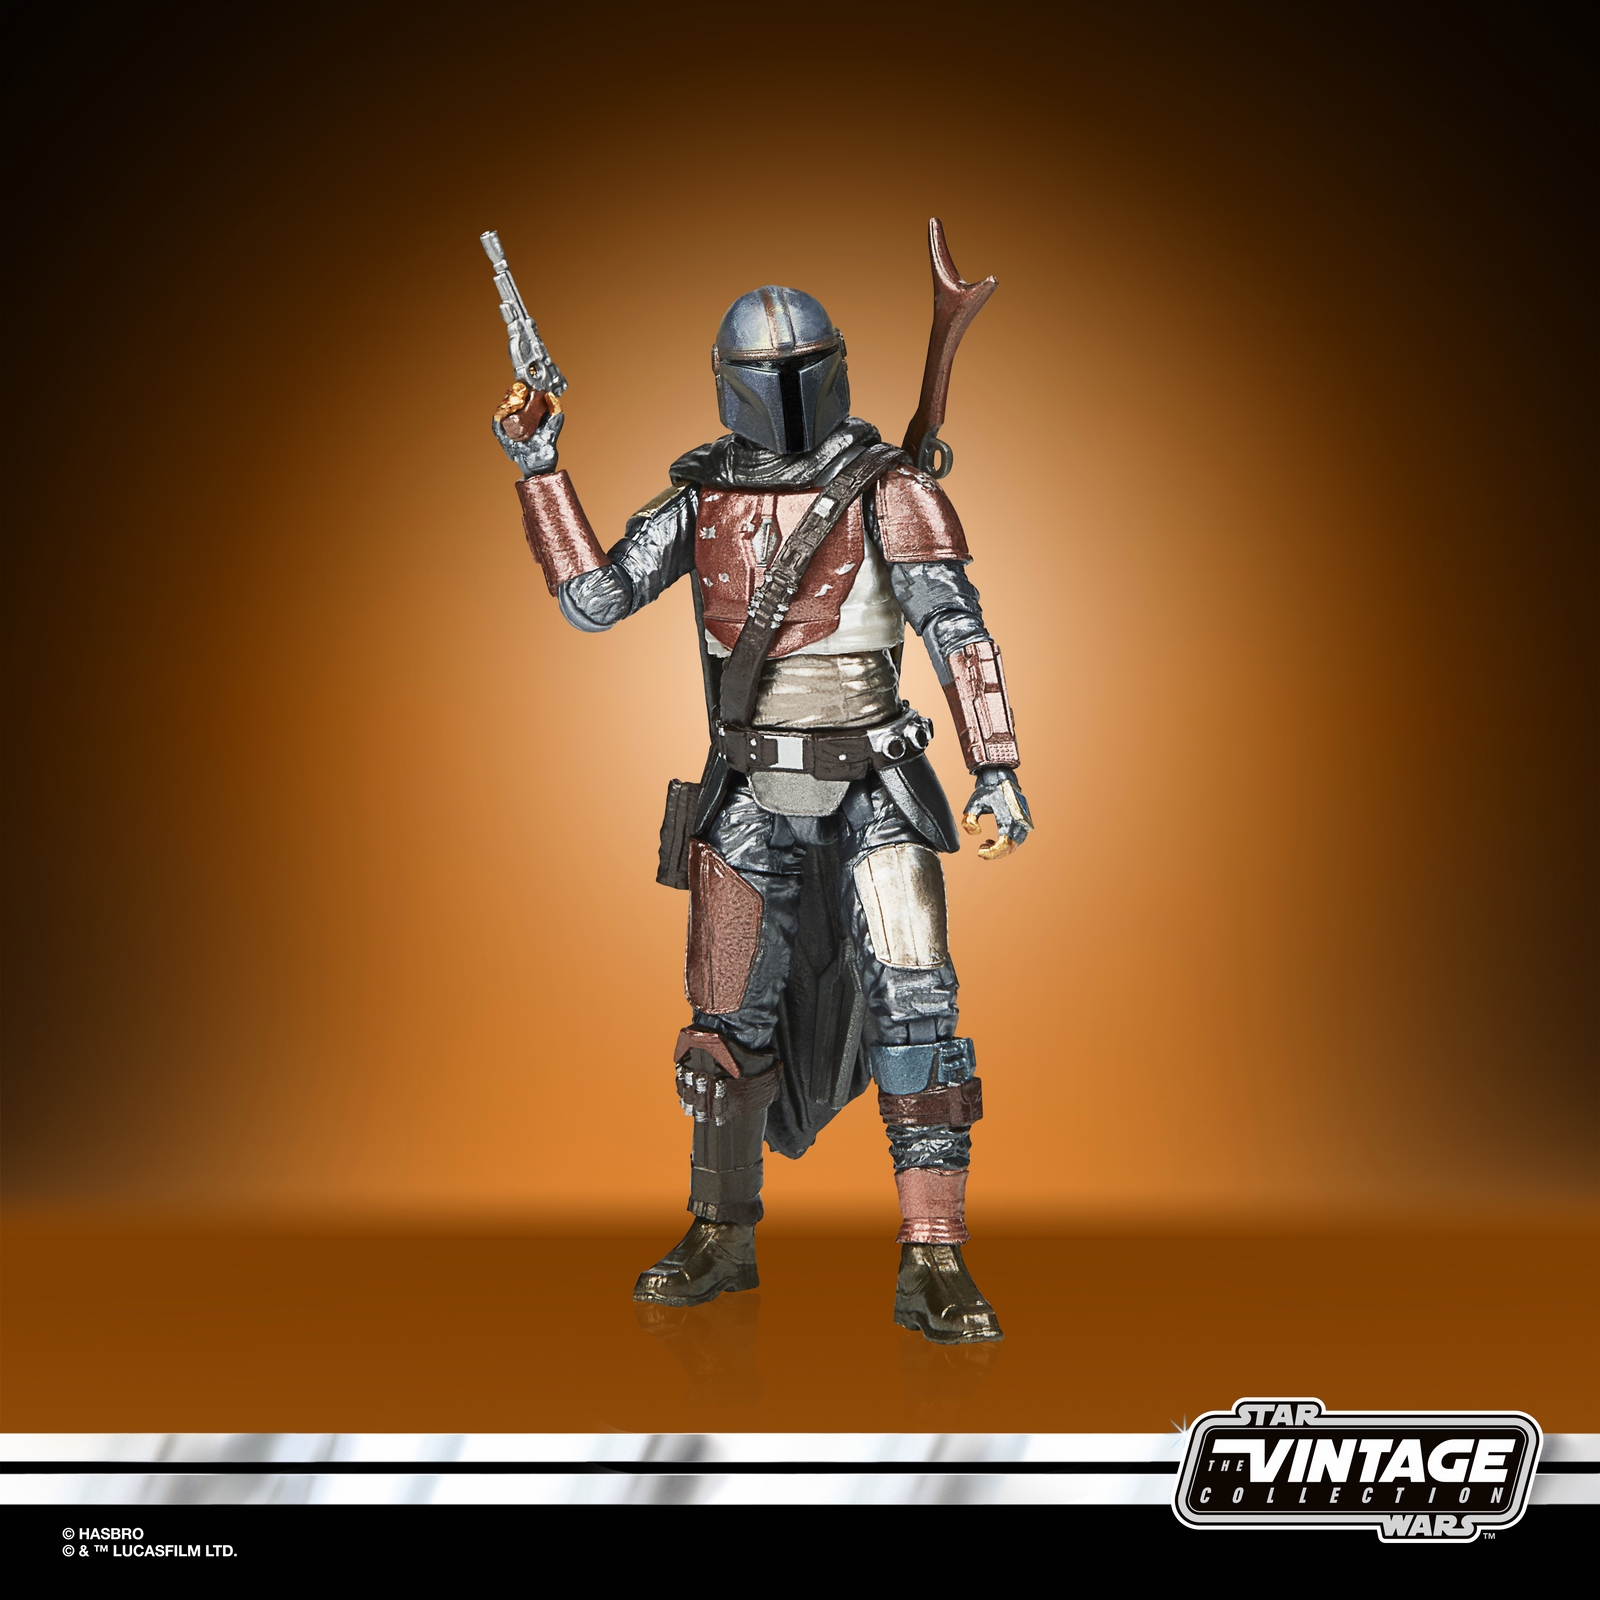 STAR WARS THE VINTAGE COLLECTION CARBONIZED COLLECTION 3.75-INCH THE MANDALORIAN - oop.jpg